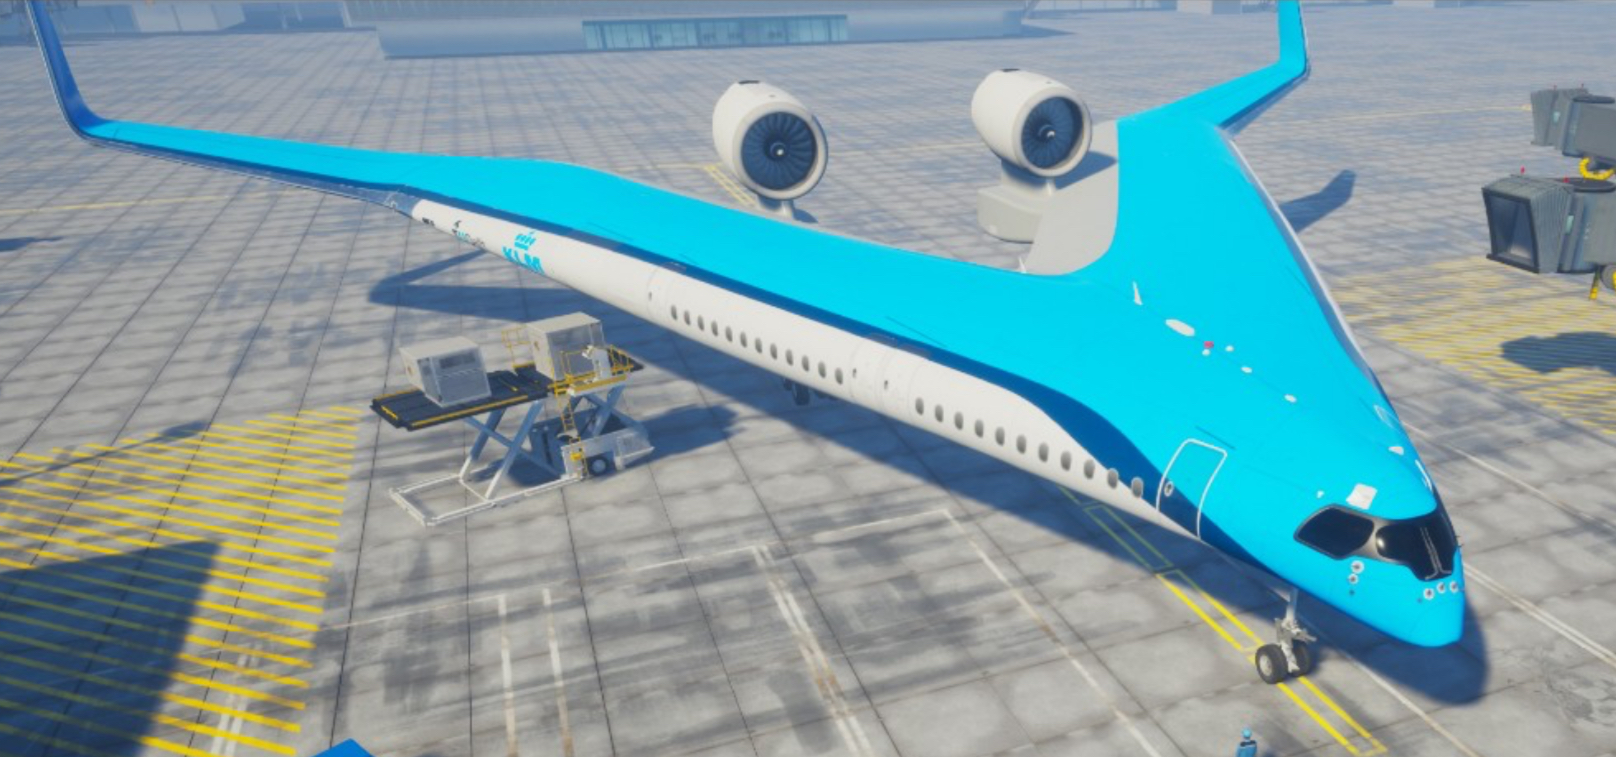 Flying-V aircraft concept developed by TU Delft in collaboration with KLM, in IATA Aircraft Technology Roadmap to 2050